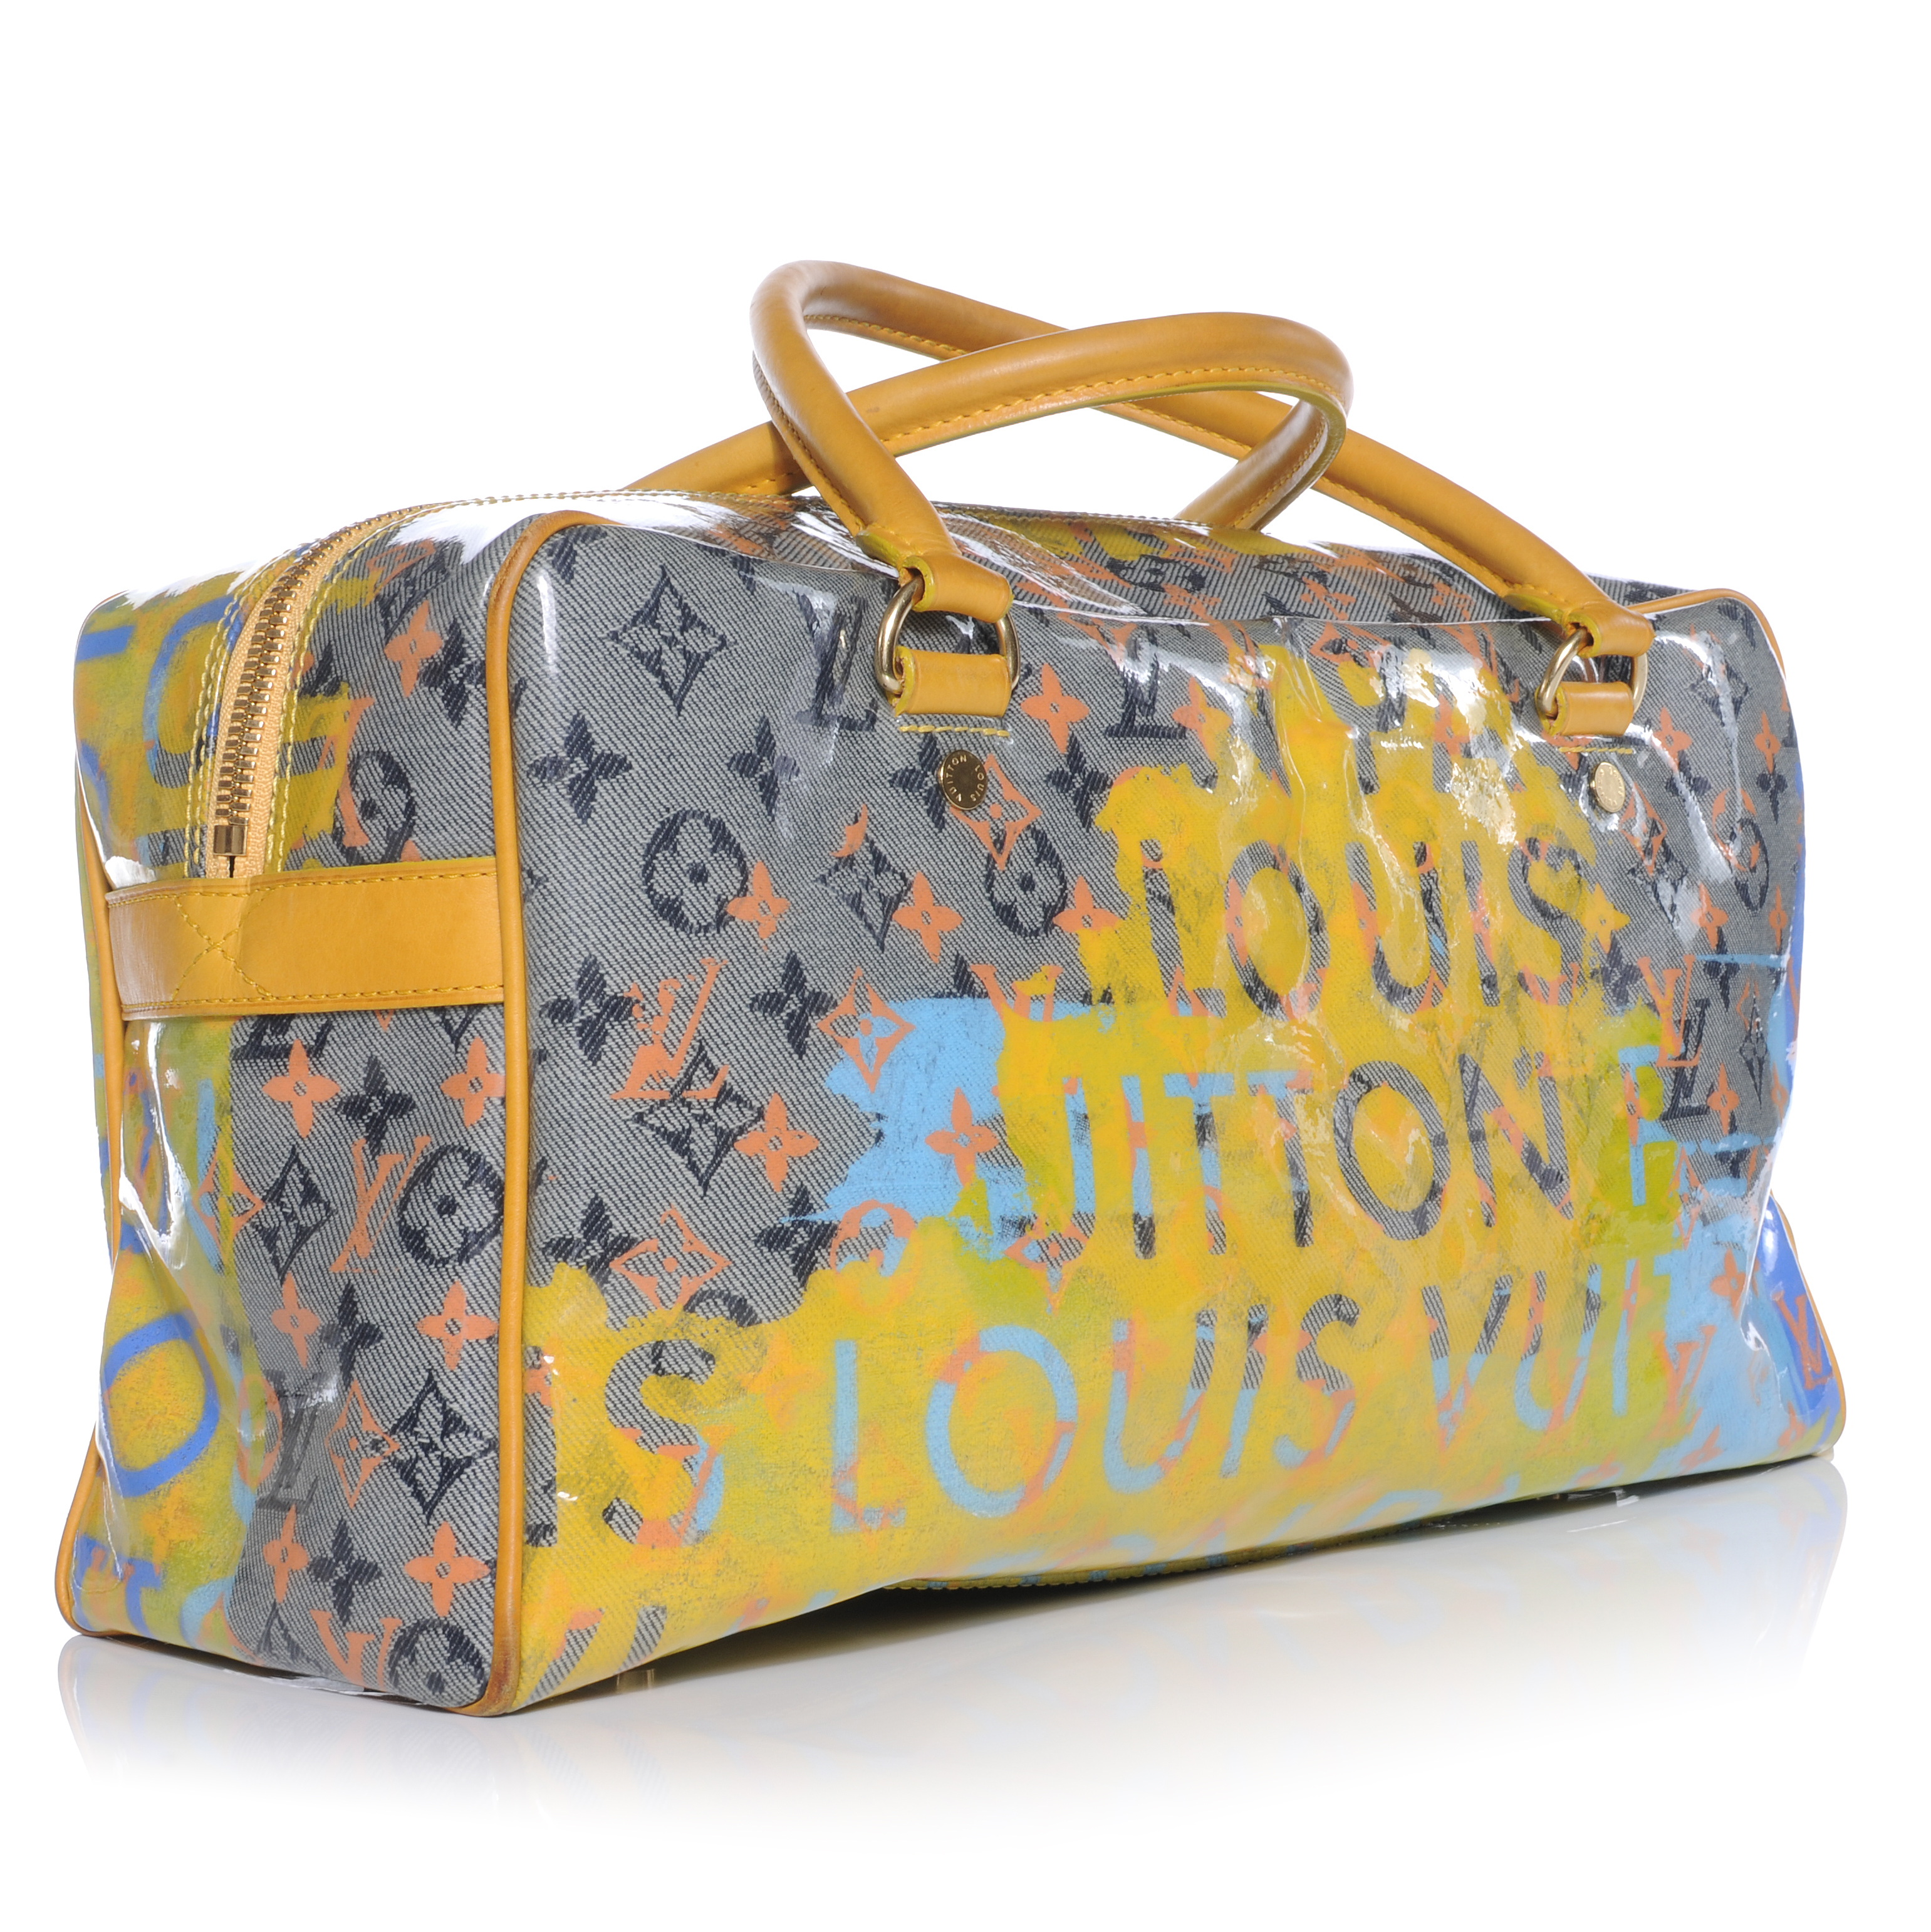 Image of A limited edition Weekender PM by Richard Prince, 2007 (denim by  Vuitton, Louis